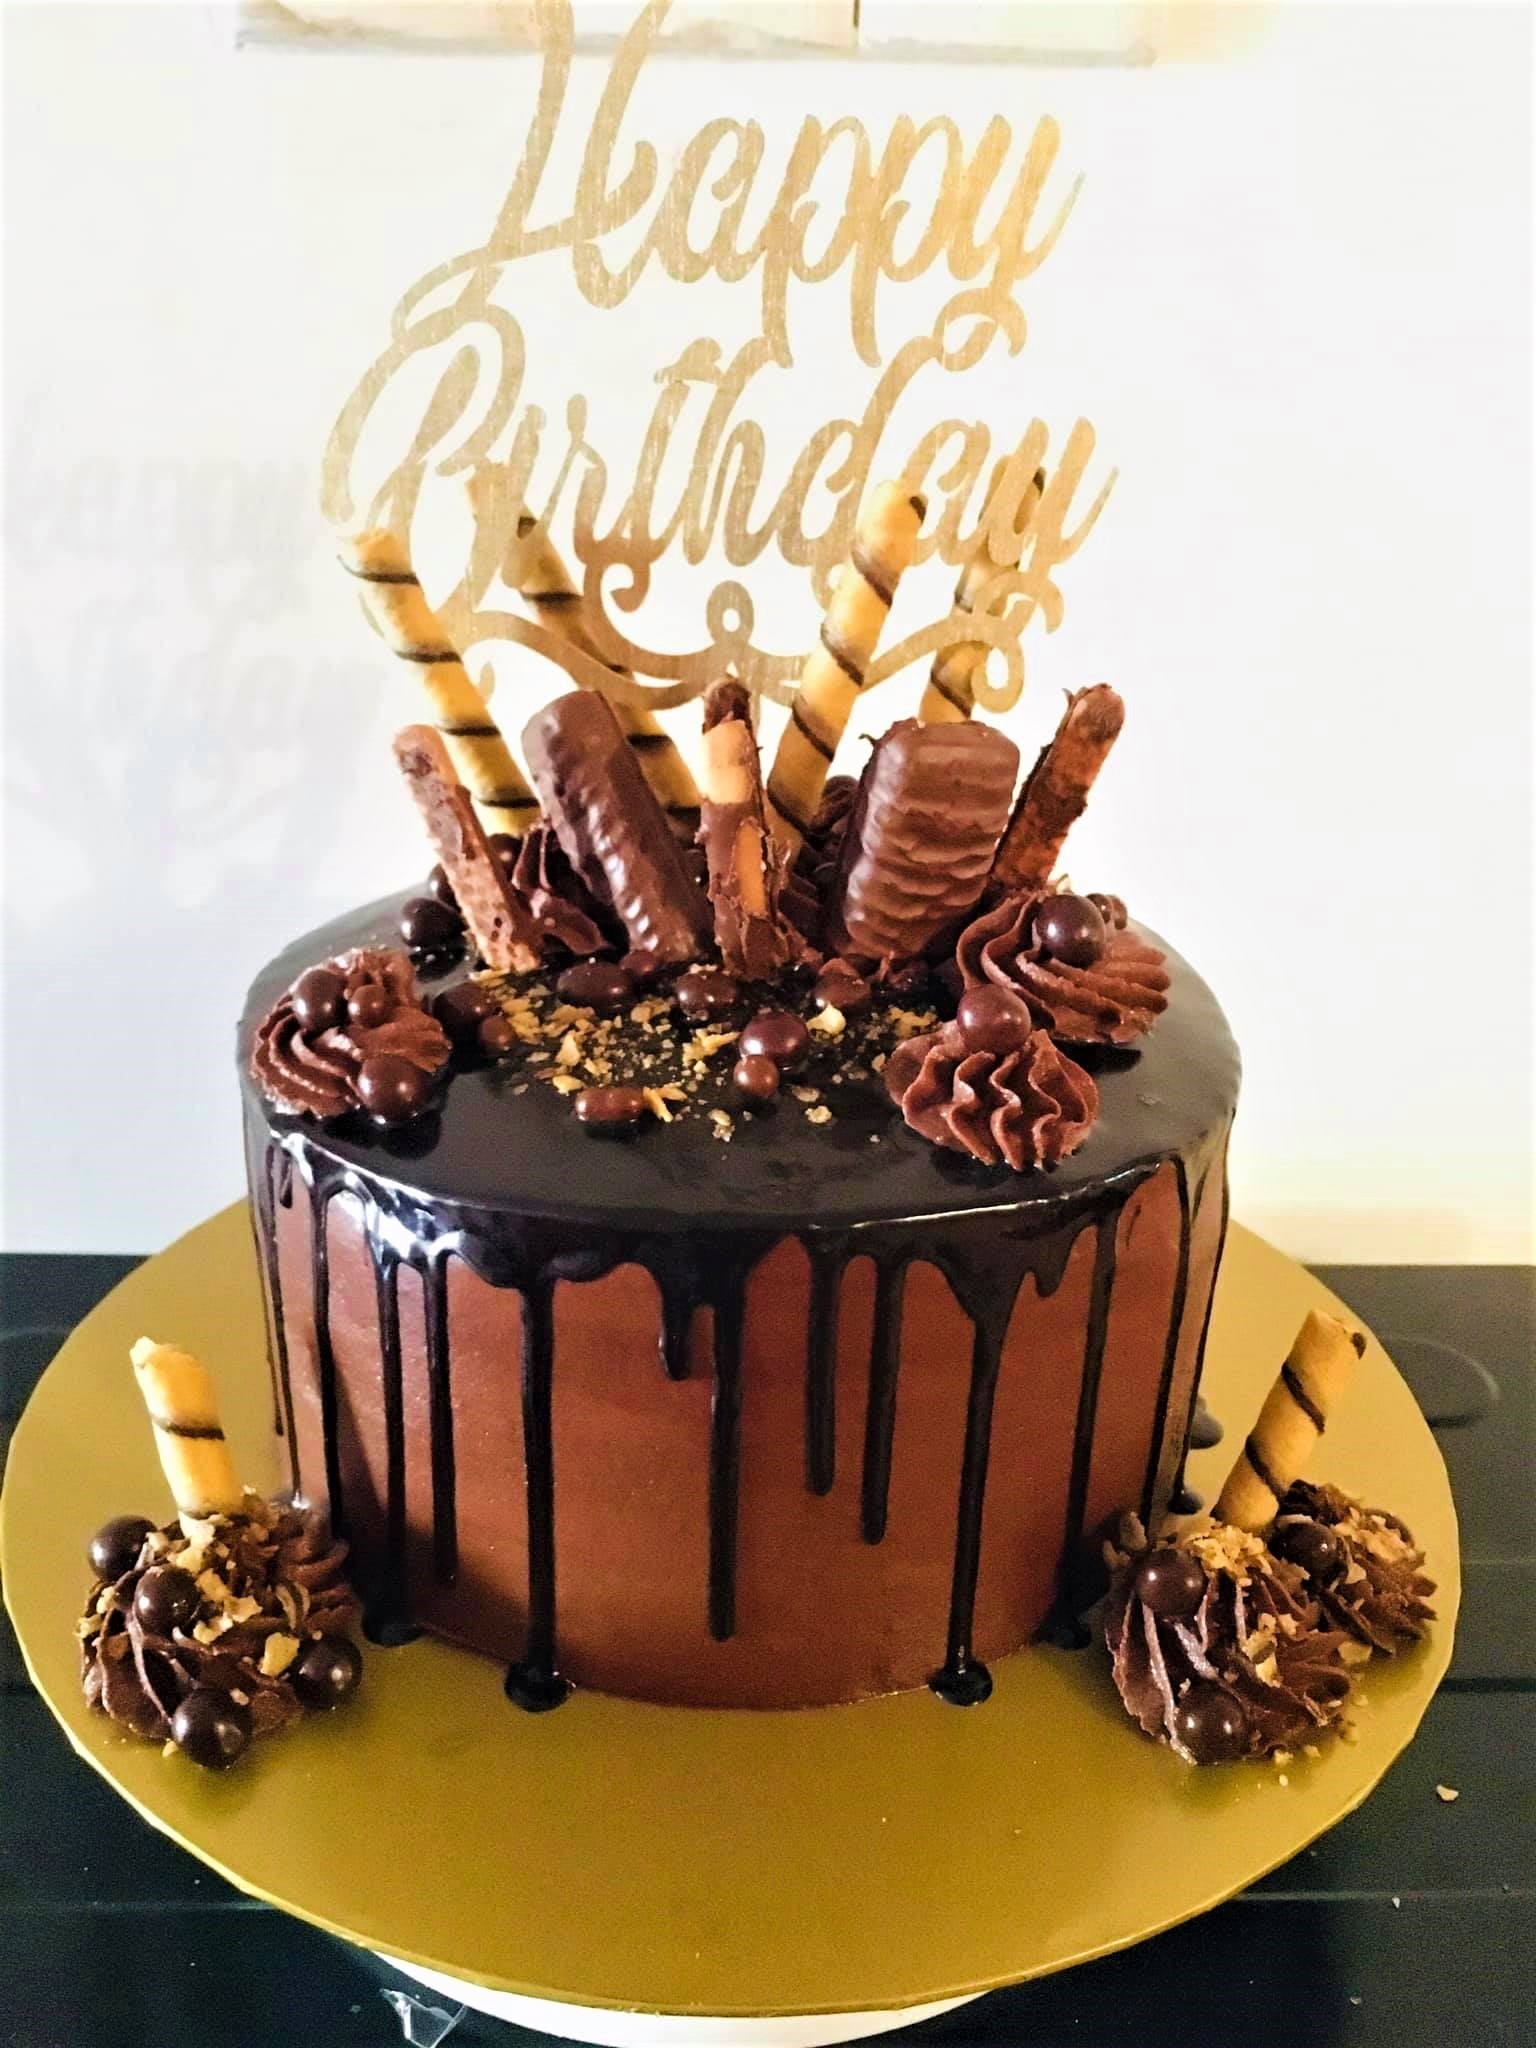 ABee Honey Cakes | Cakes & Bakery in Colombo | Ceylon Pages